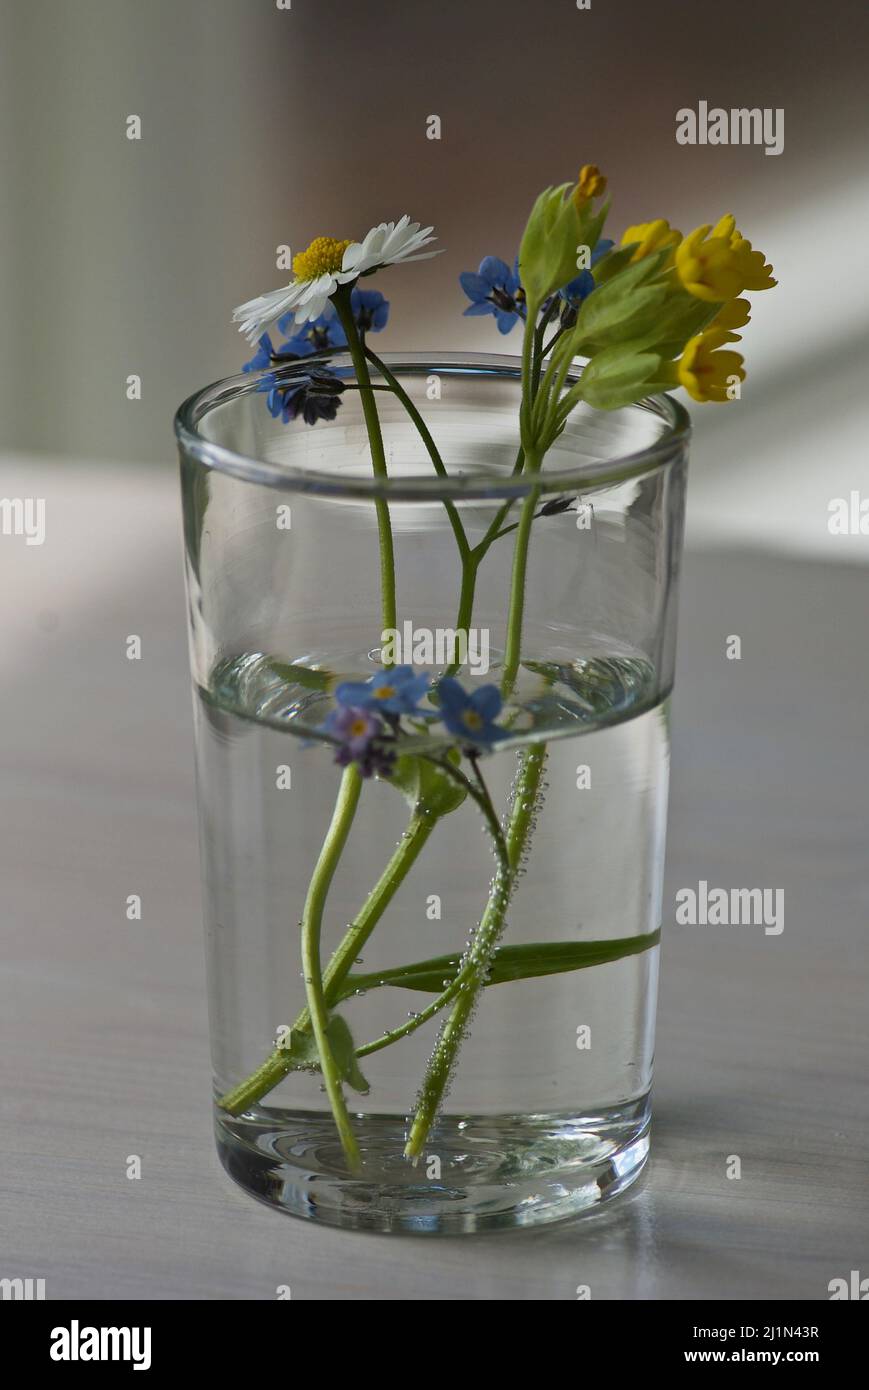 Some picked spring flowers put in a drinking glass with water. Stock Photo